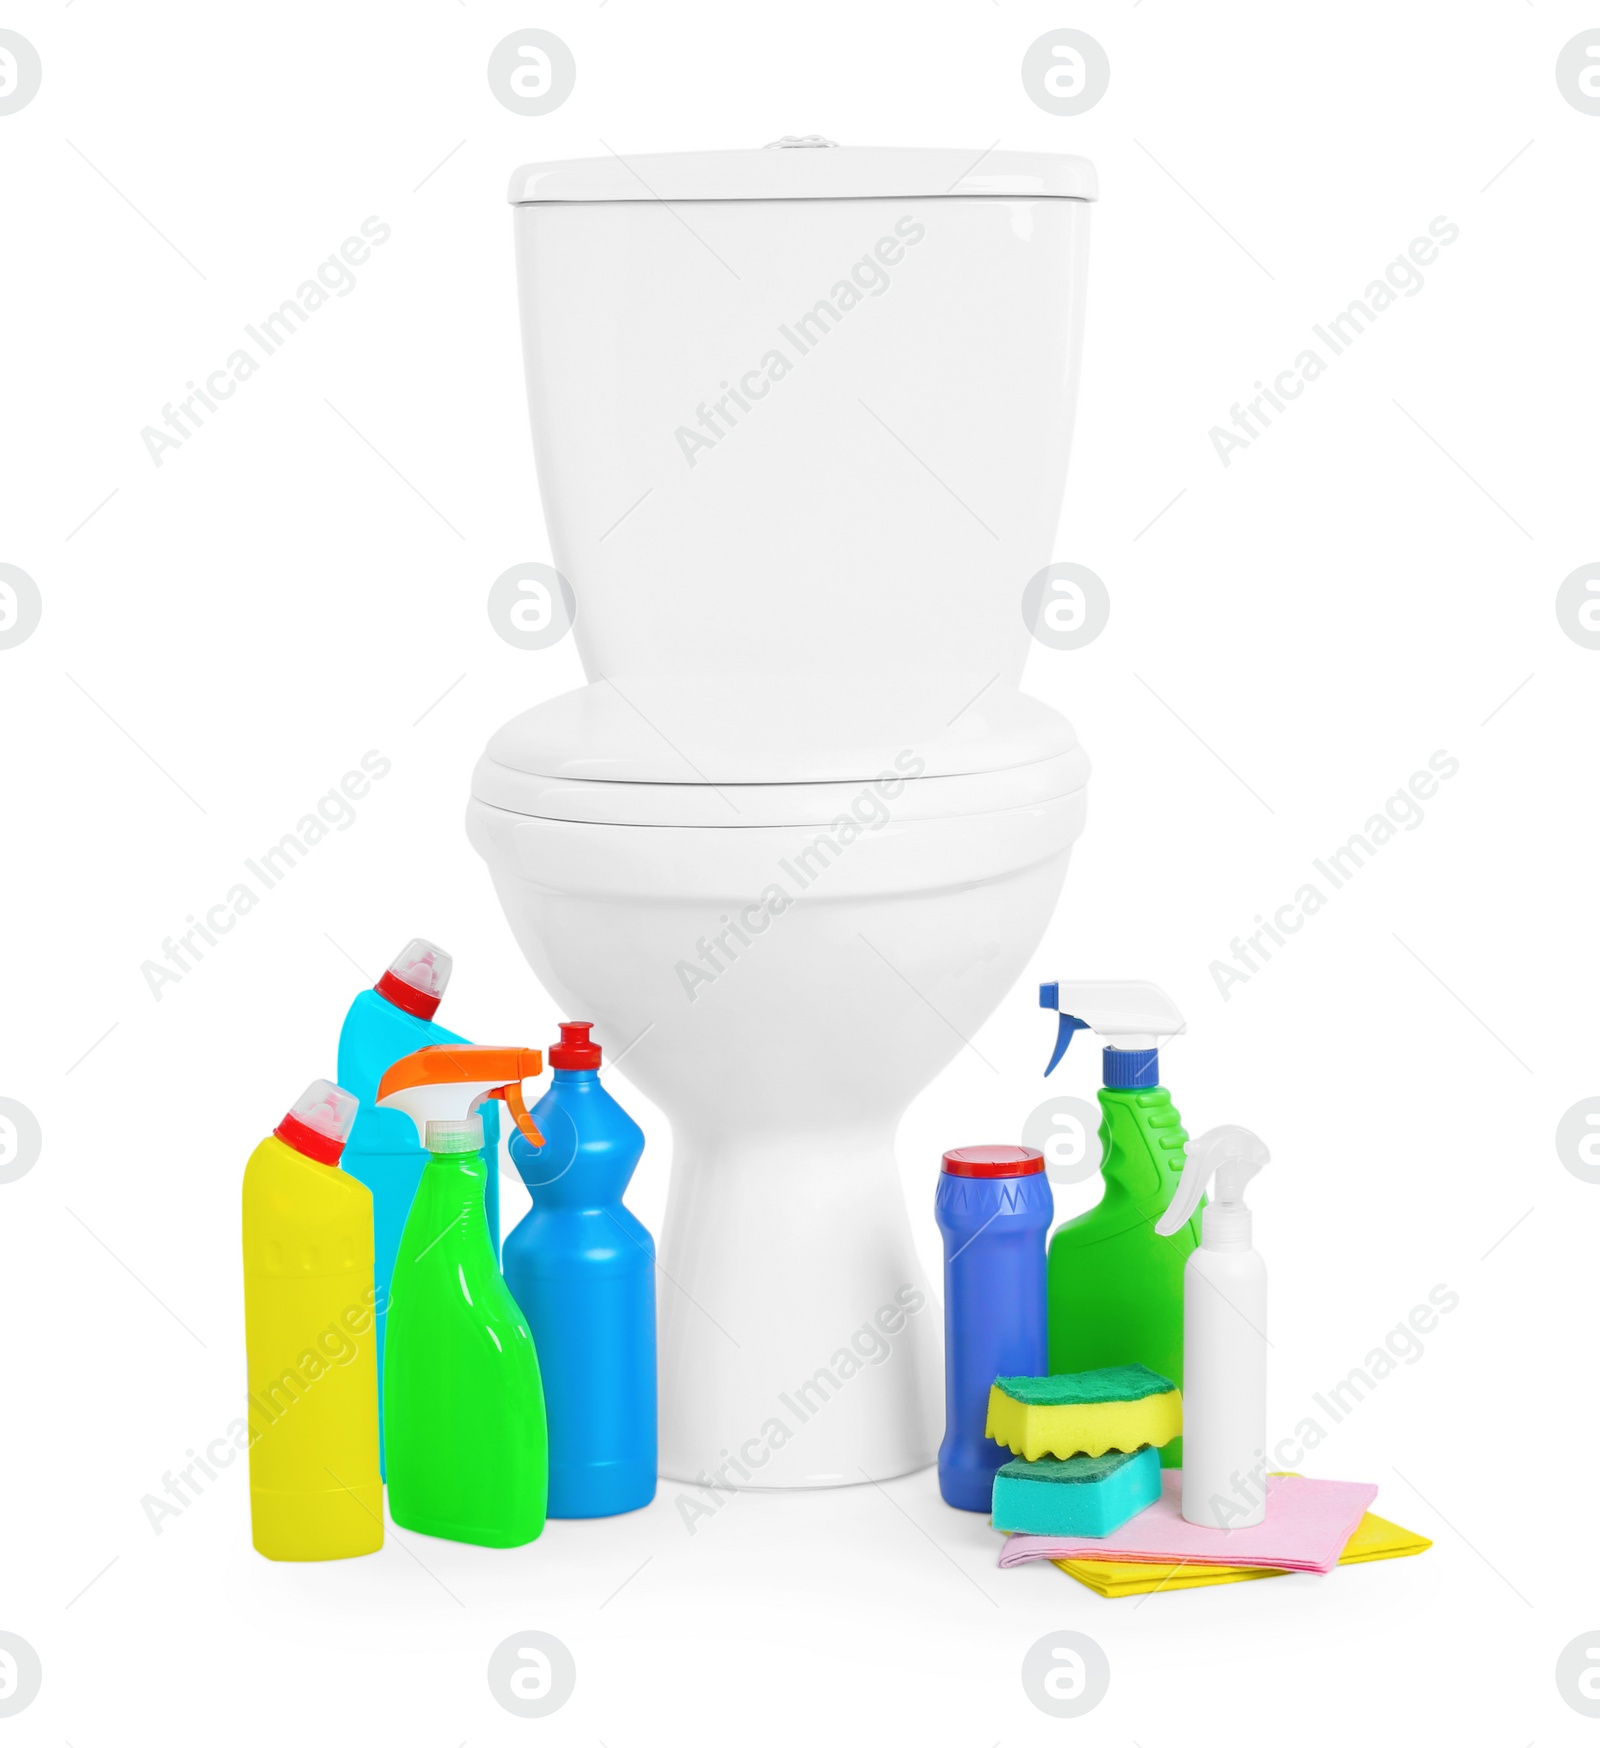 Photo of Different cleaning supplies near toilet bowl on white background